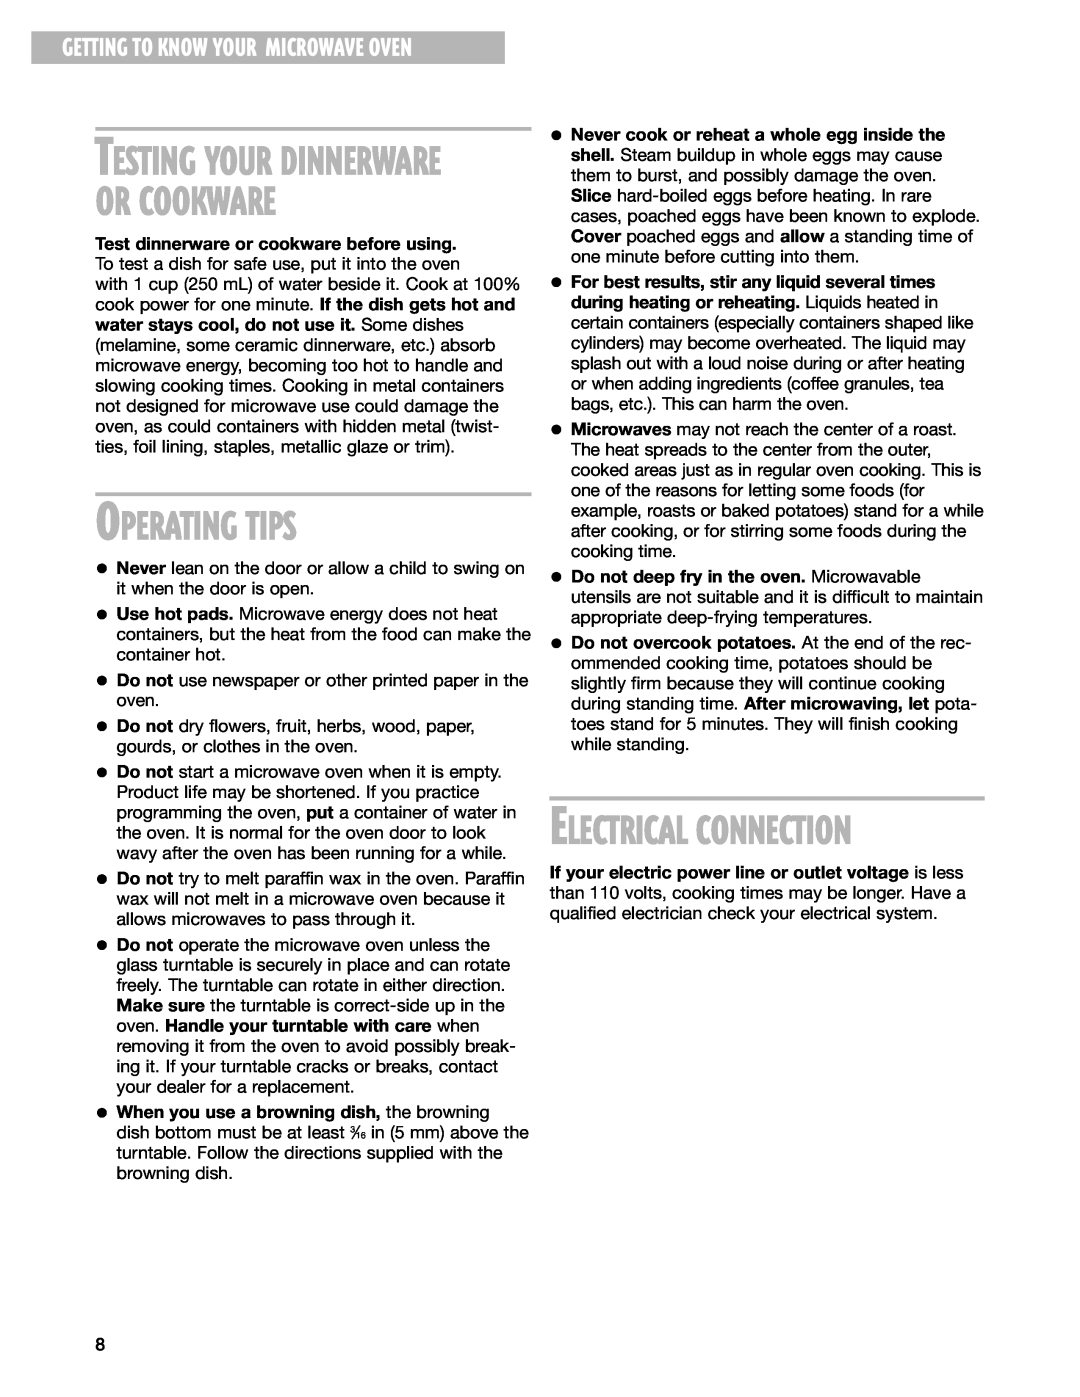 Whirlpool MT3185SH installation instructions Or Cookware, Operating Tips, Electrical Connection, Testing Your Dinnerware 